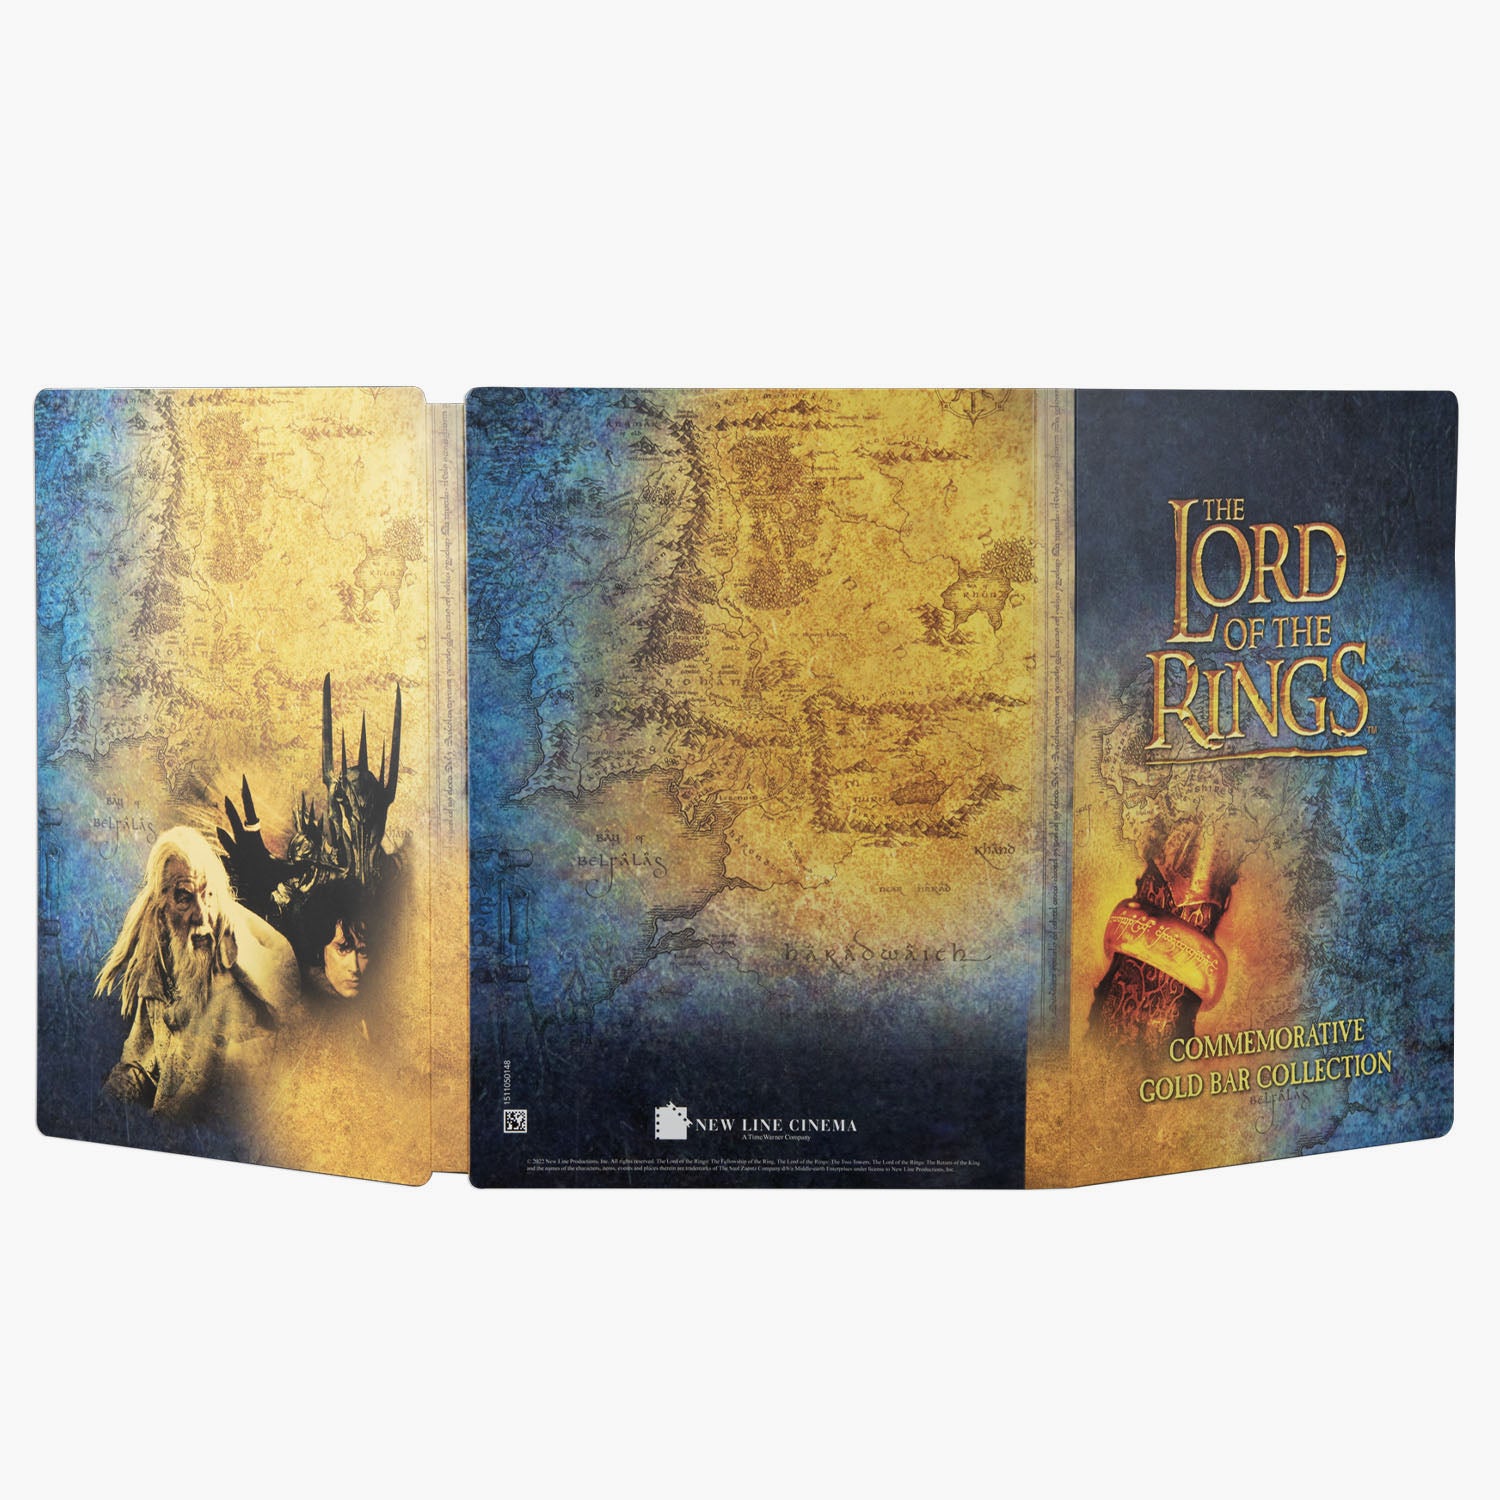 The Official Lord Of The Rings 2023 Solid Gold Coin Collection